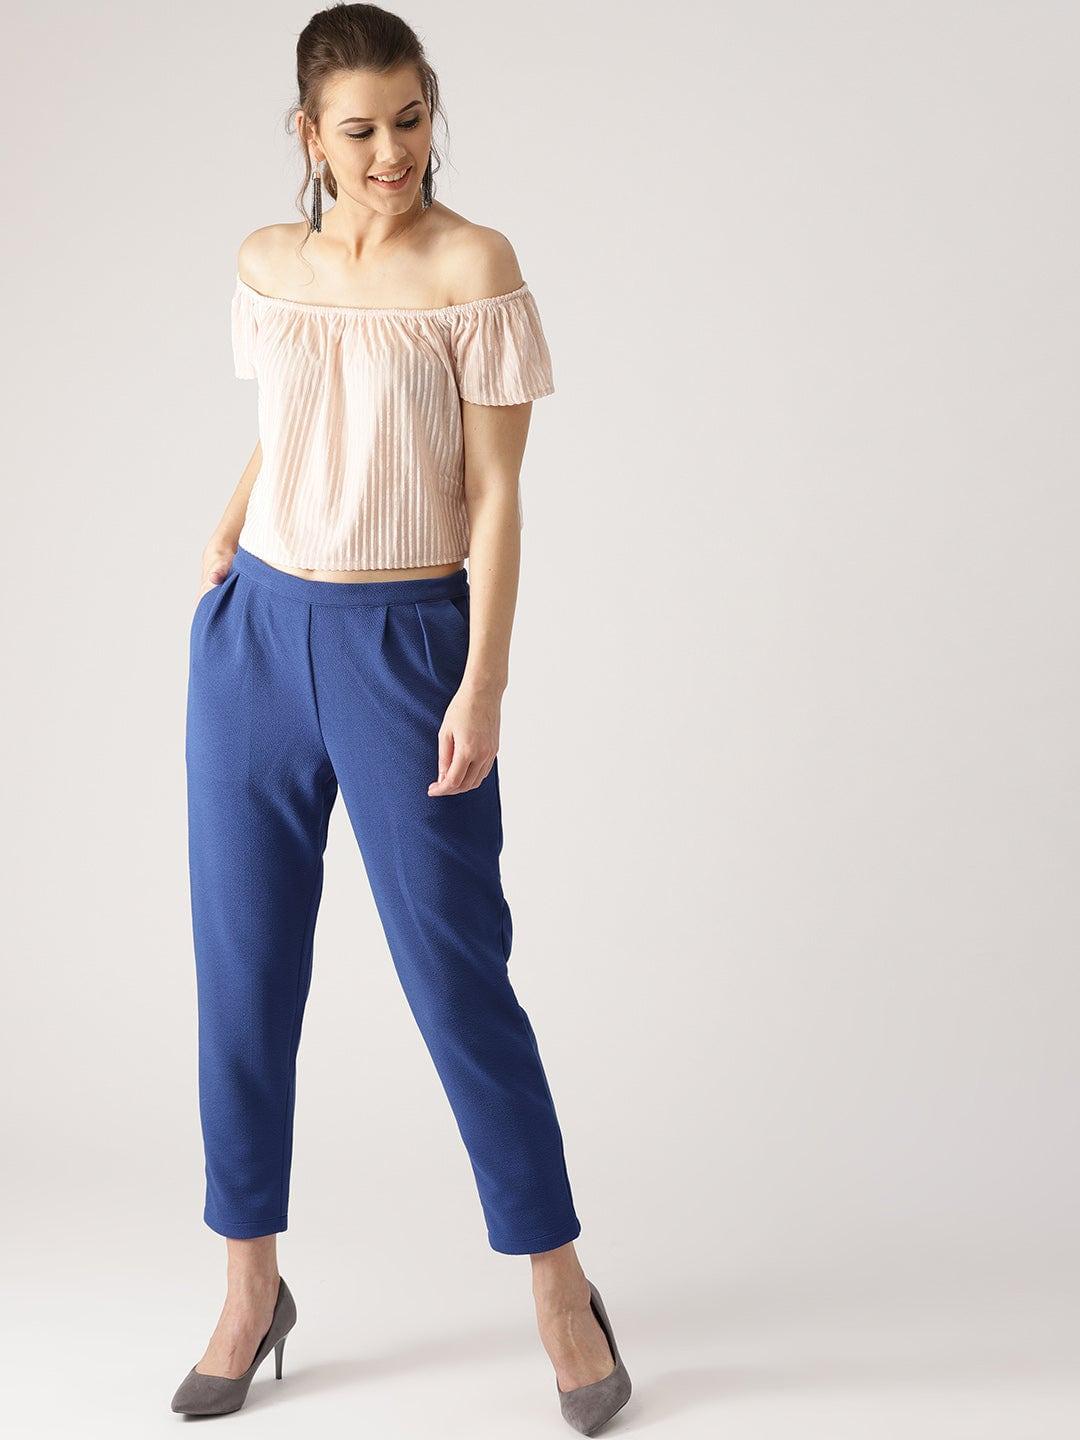 Blue Solid Polyester Trousers - Libas